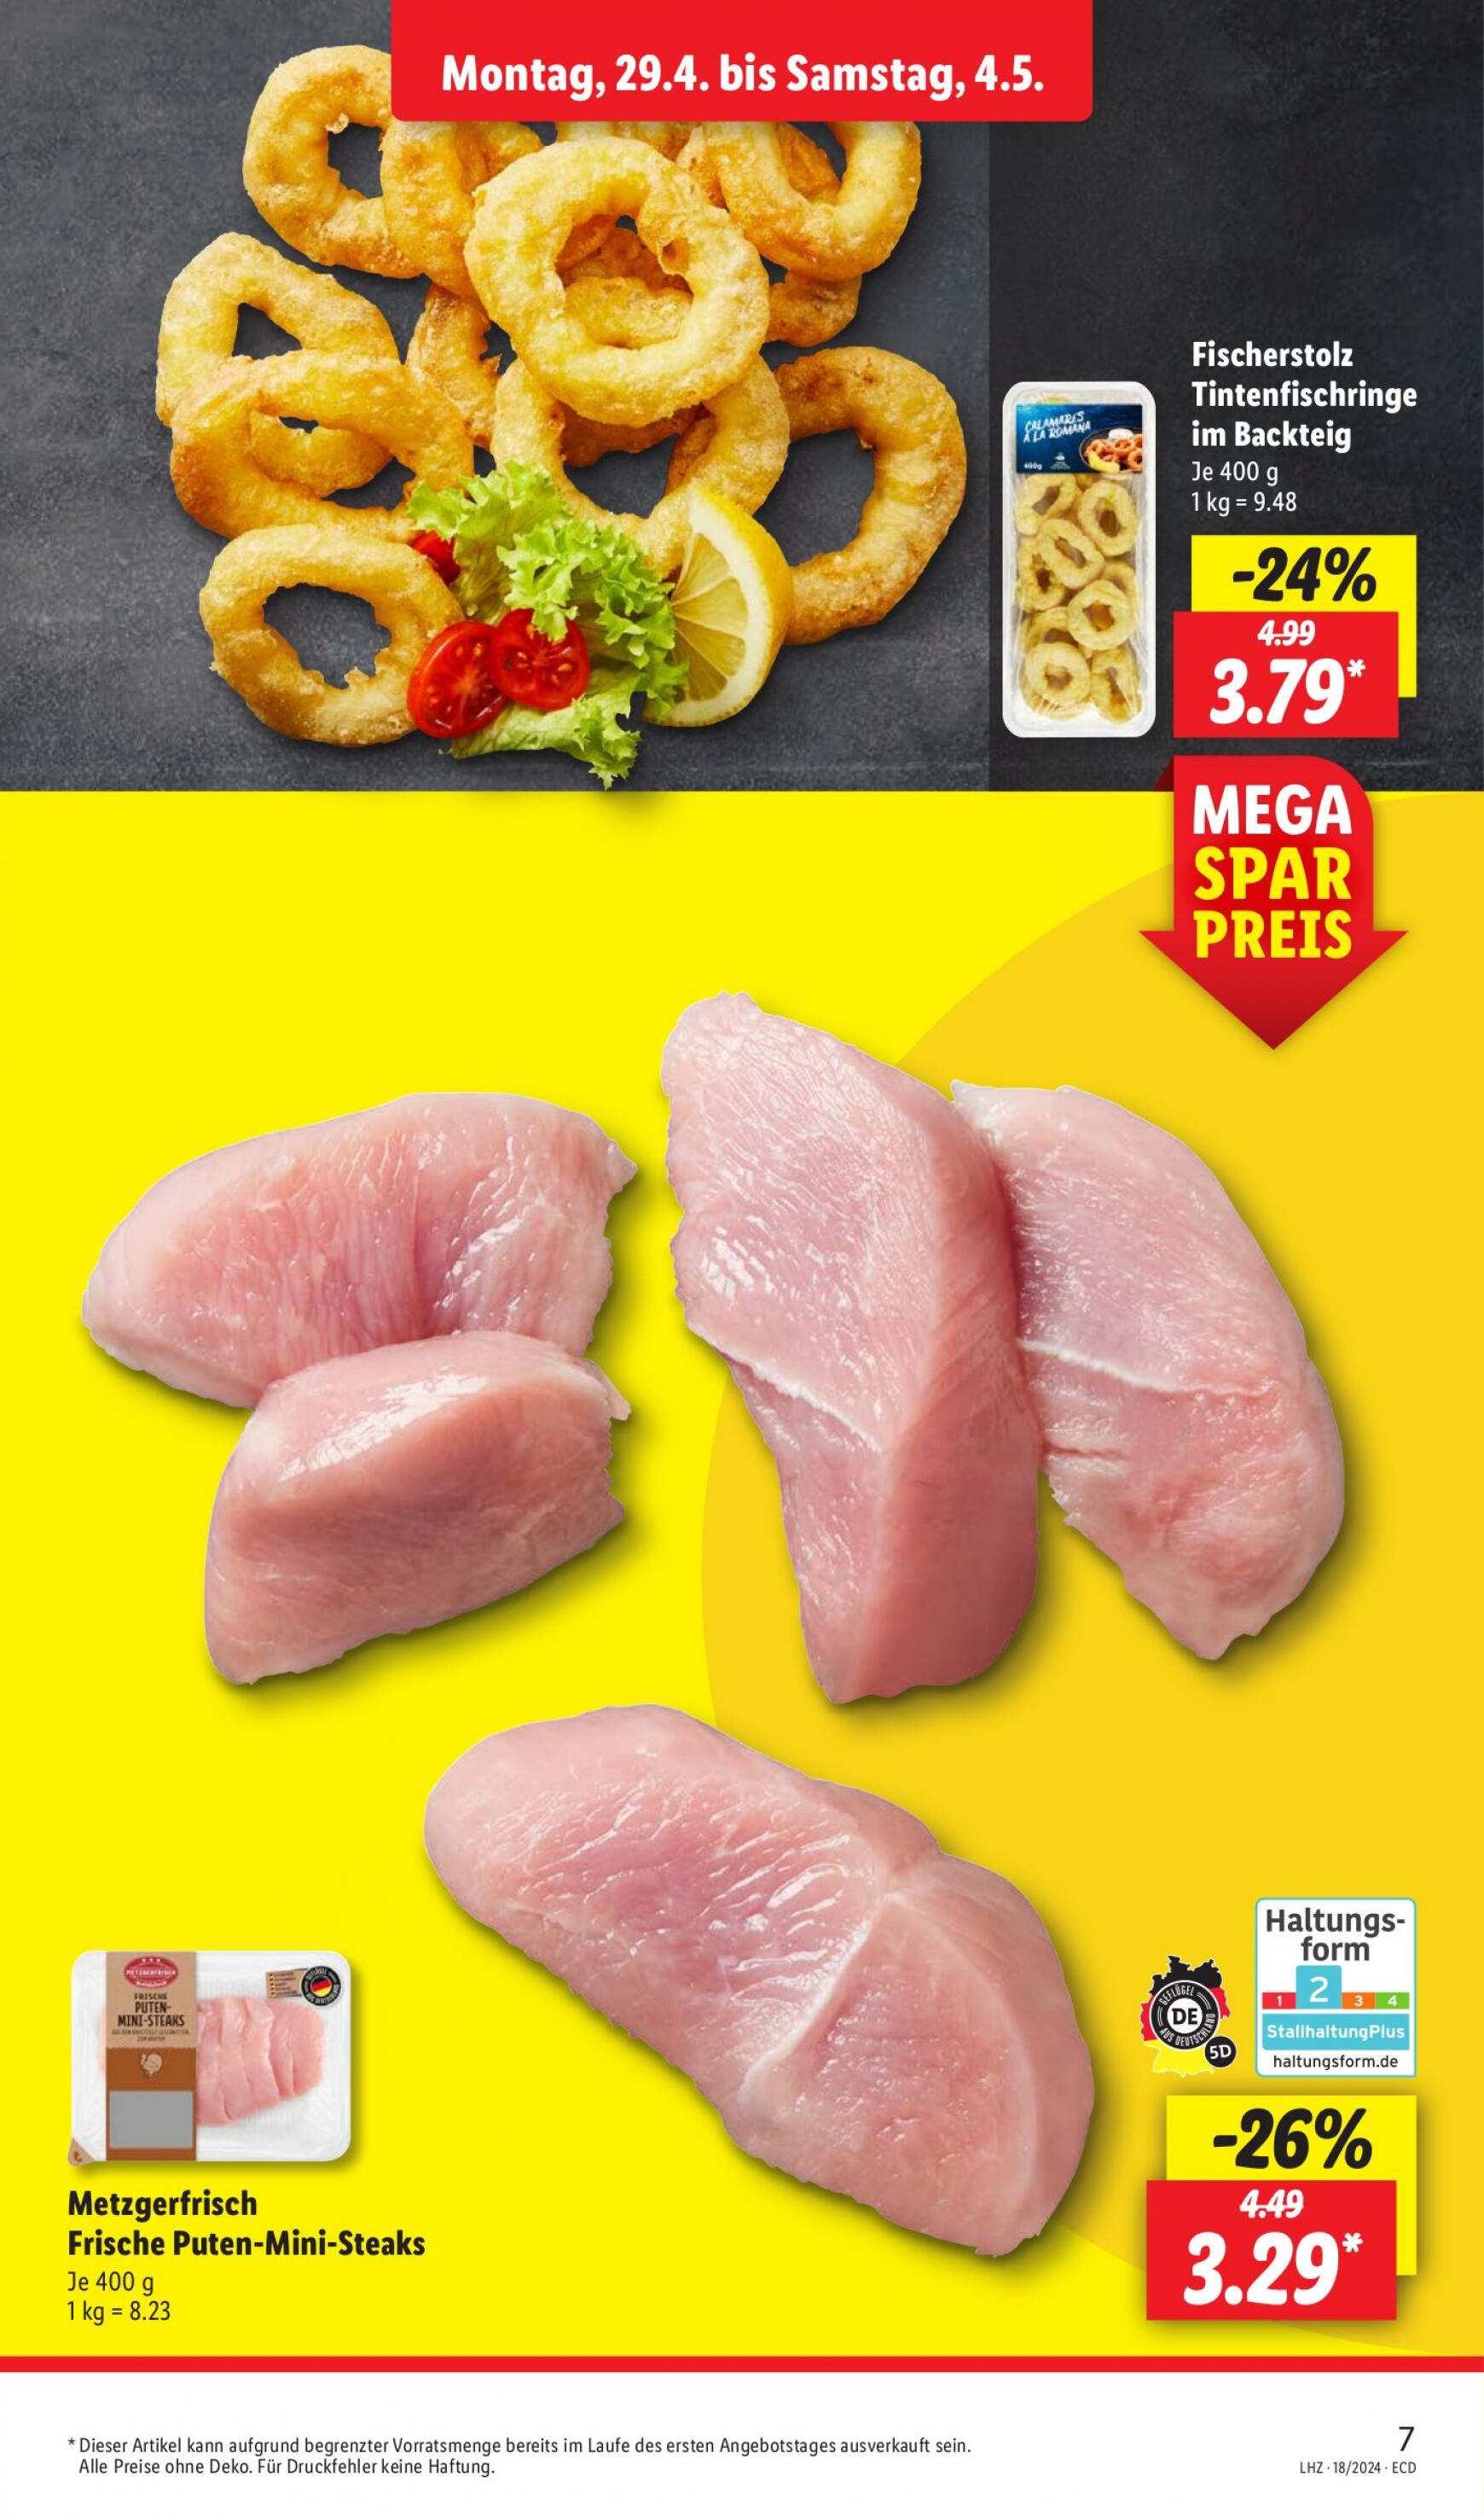 lidl - Flyer Lidl aktuell 29.04. - 04.05. - page: 11